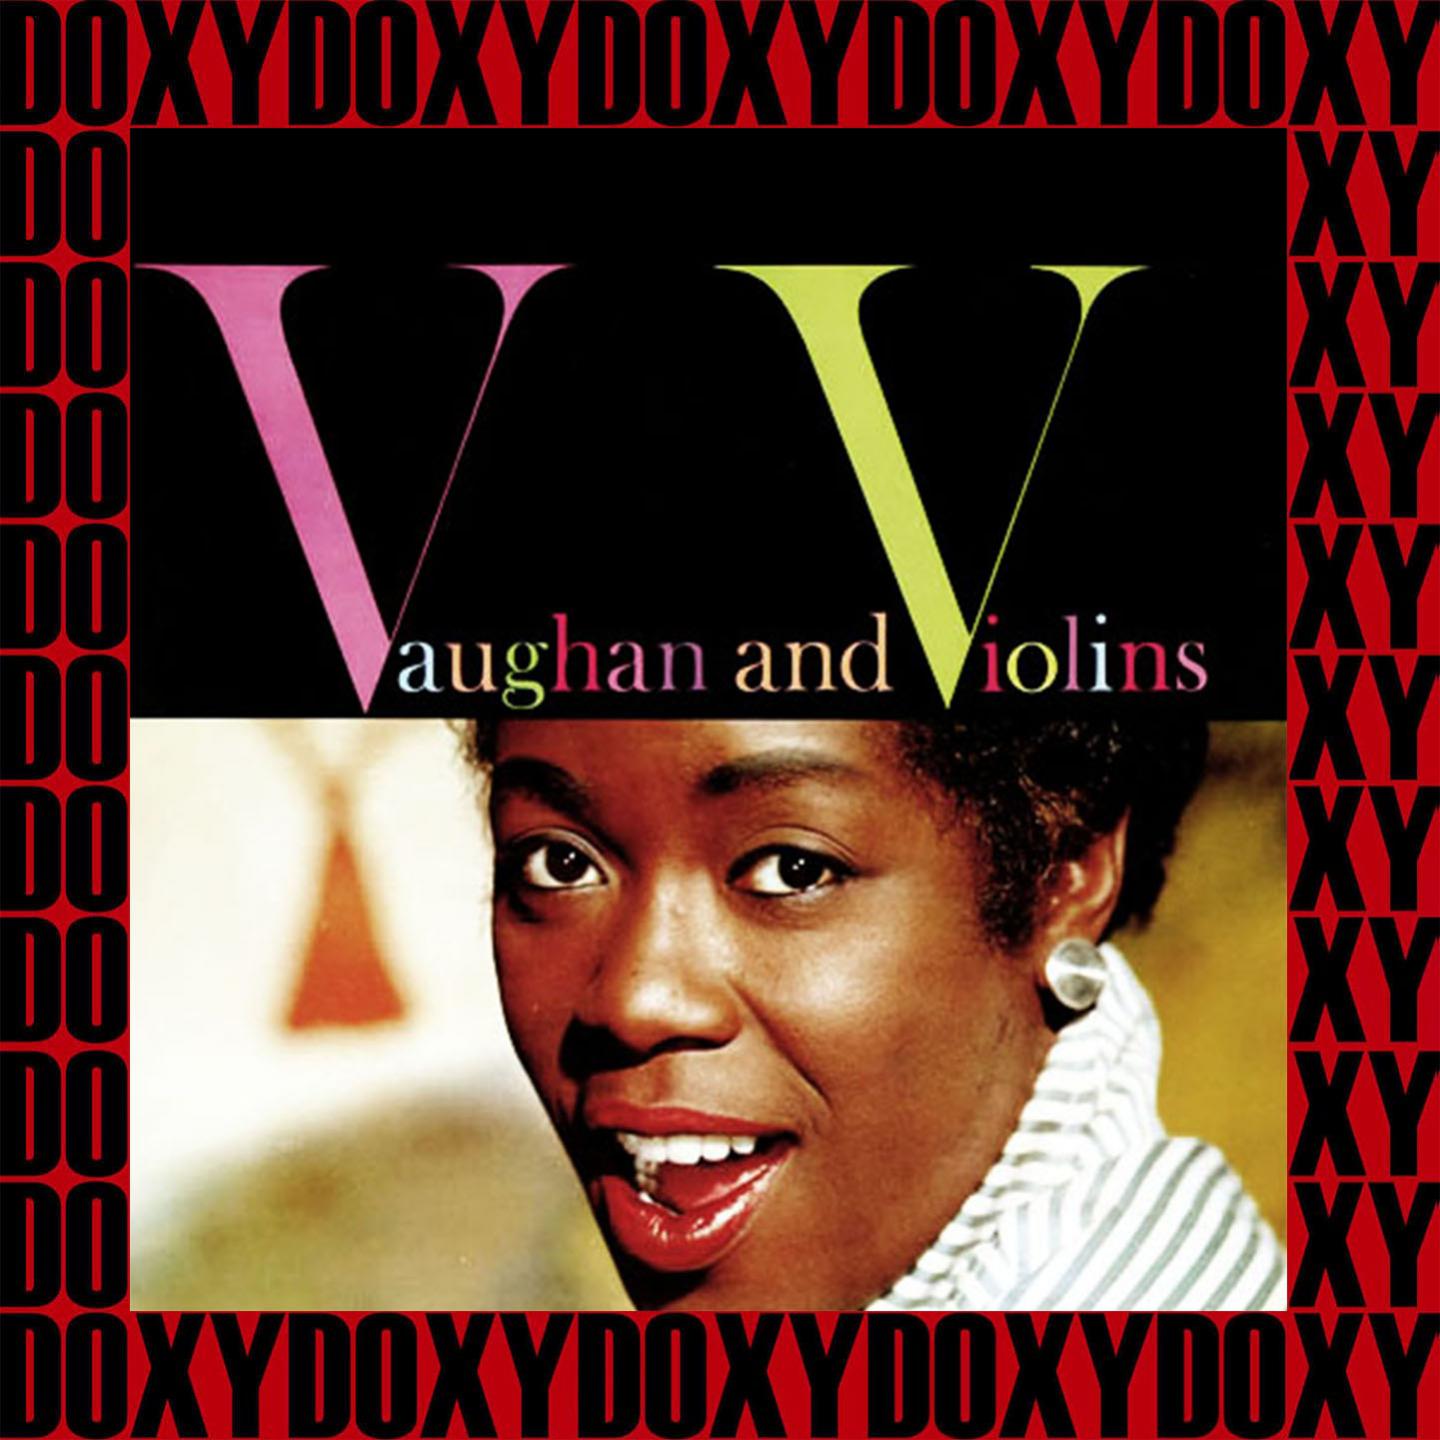 Vaughan and Violins (Remastered Version) (Doxy Collection)